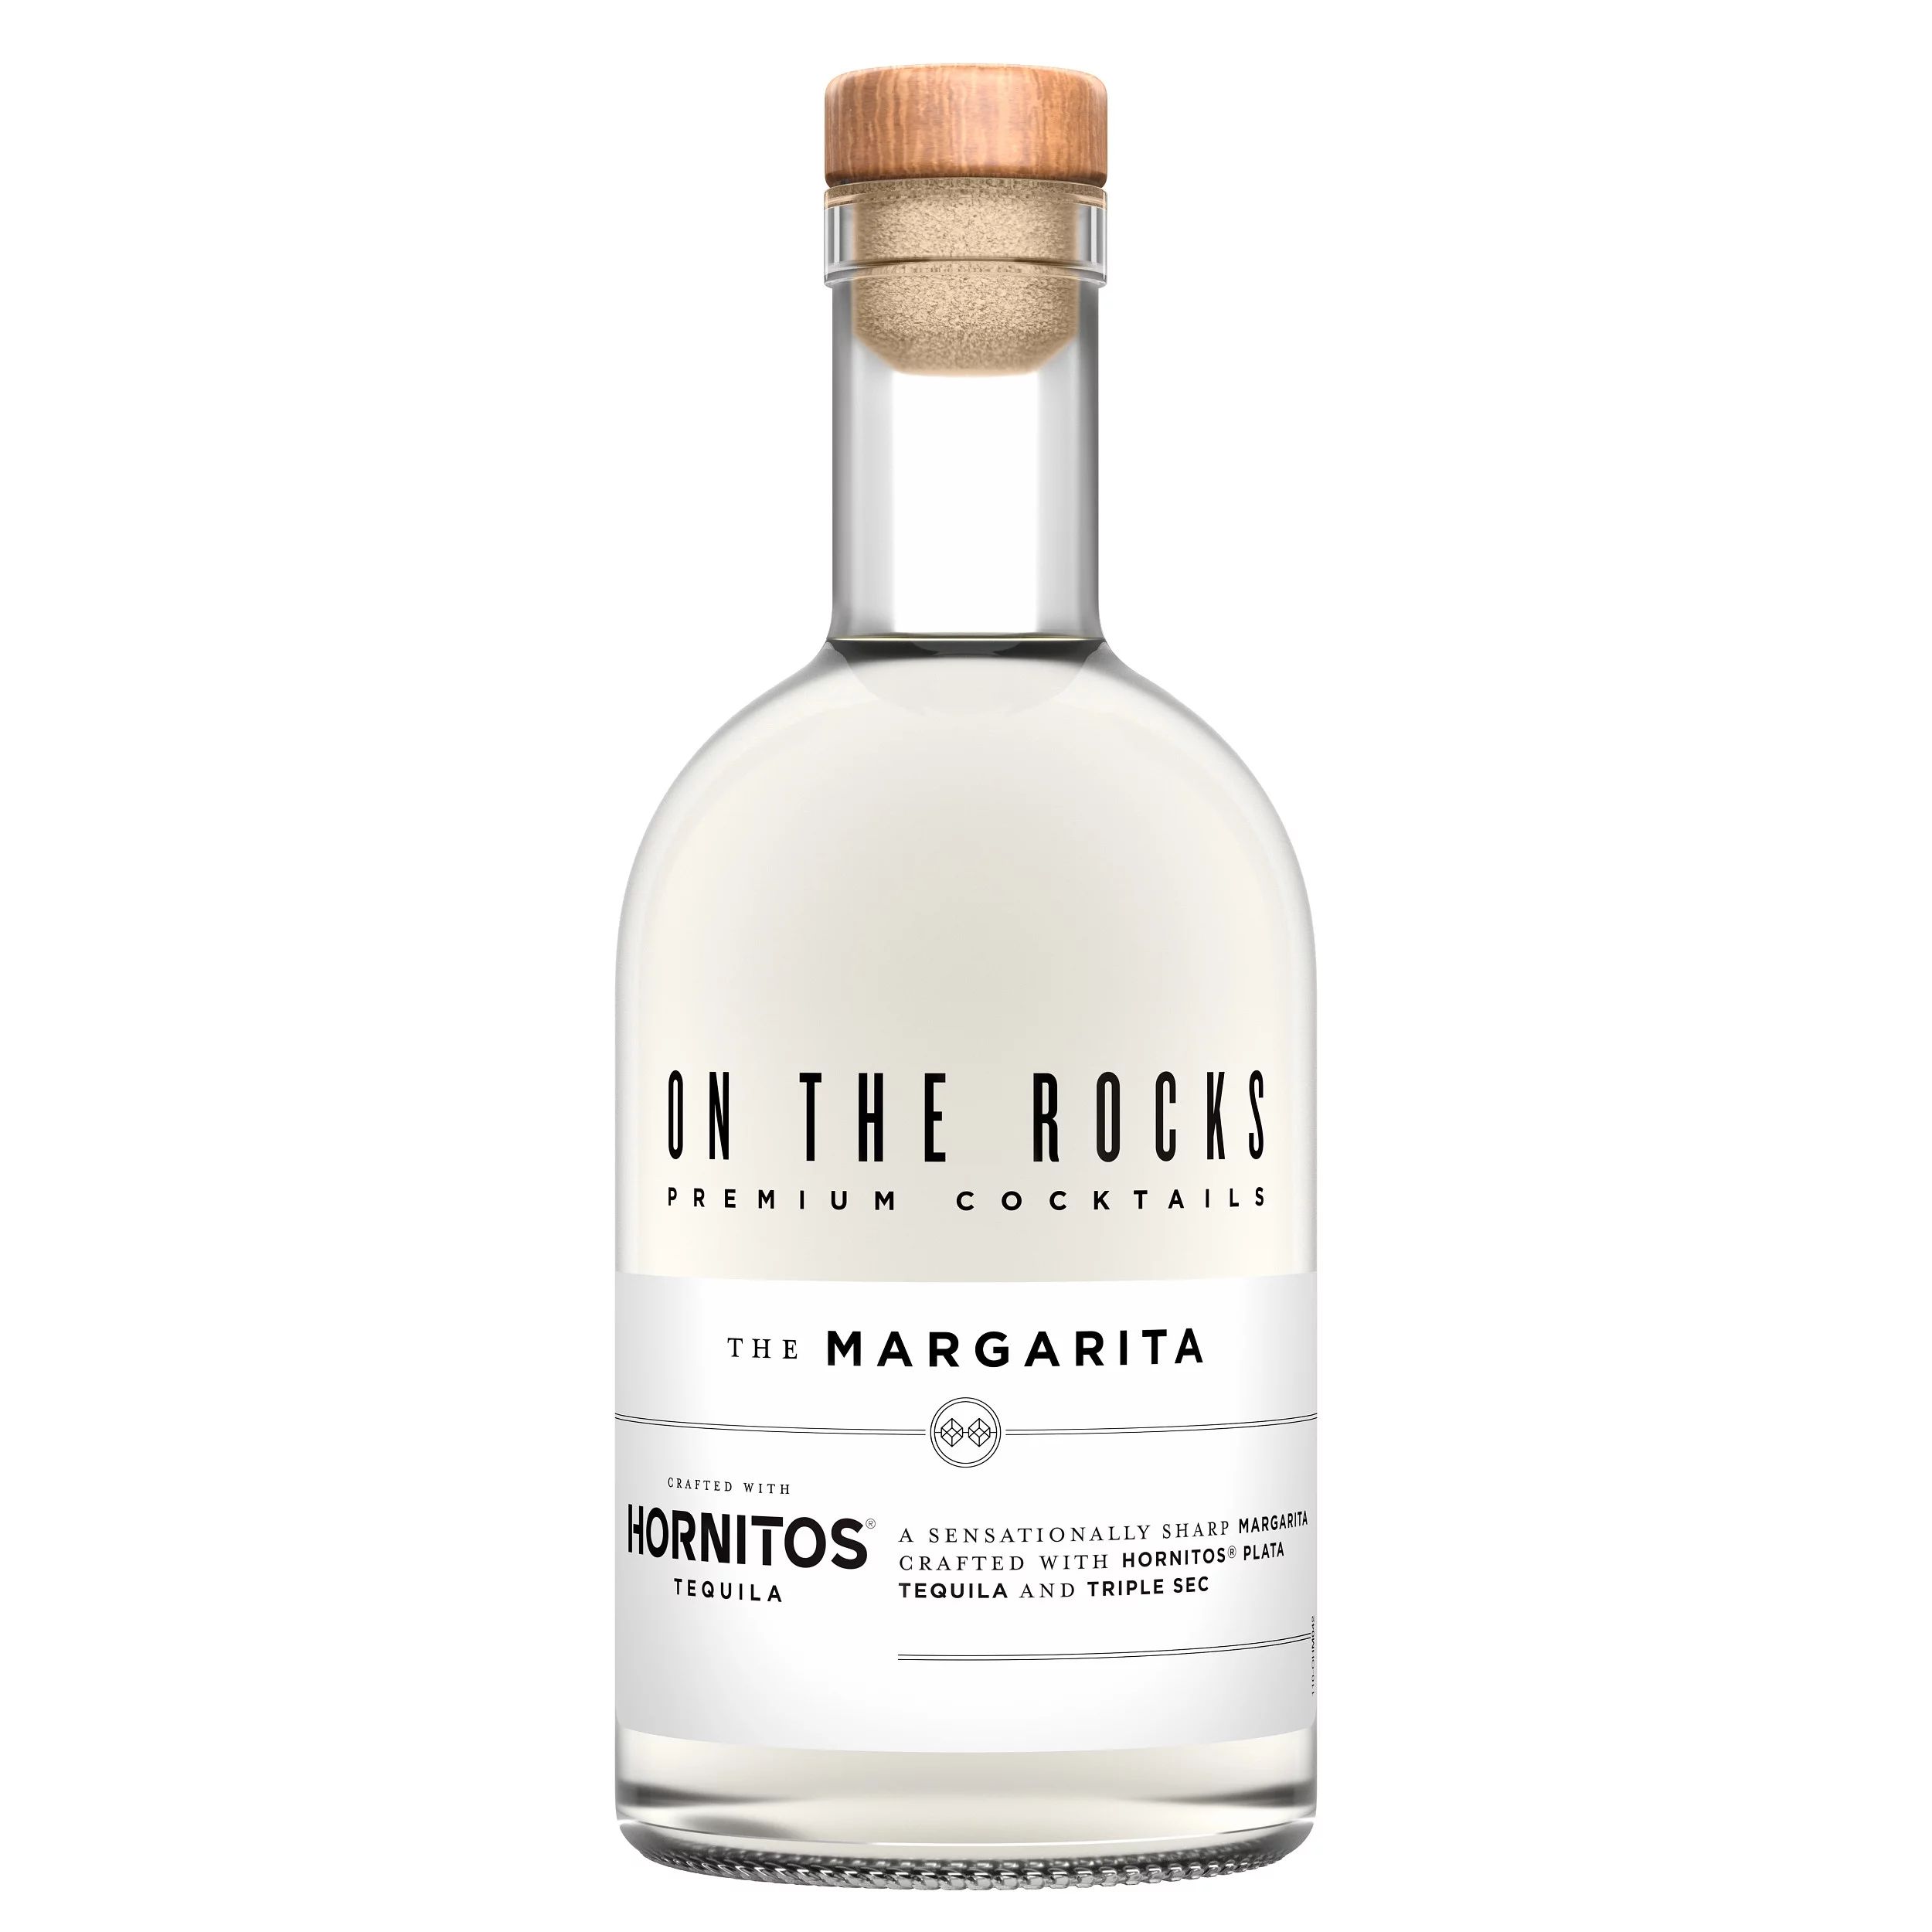 Otr-On the Rocks the Margarita Crafted with Hornitos Plata Tequila Citrus, 375 ml Bottle, ABV 20.... | Walmart (US)